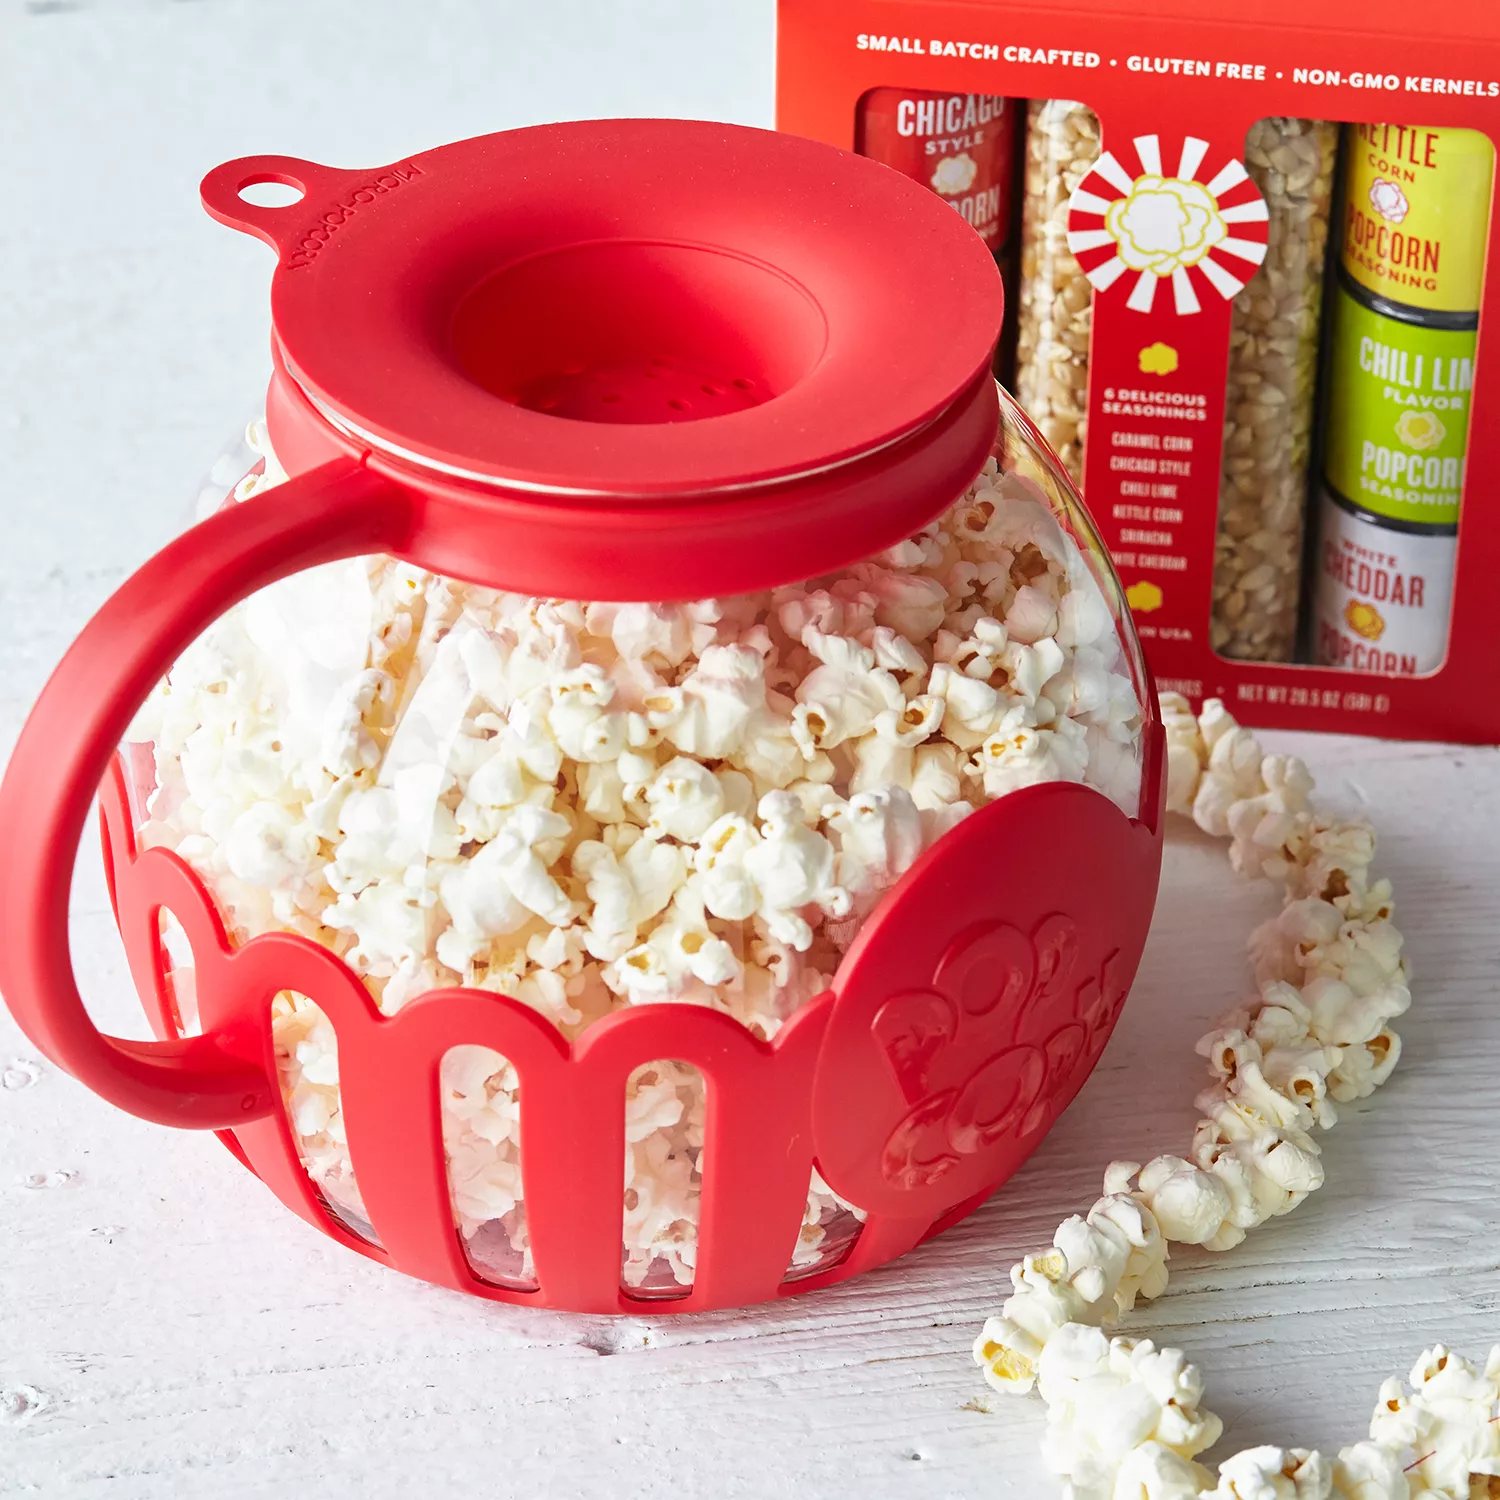 W & P Design - Personal Popcorn Popper Microwave Bowl in Charcoal